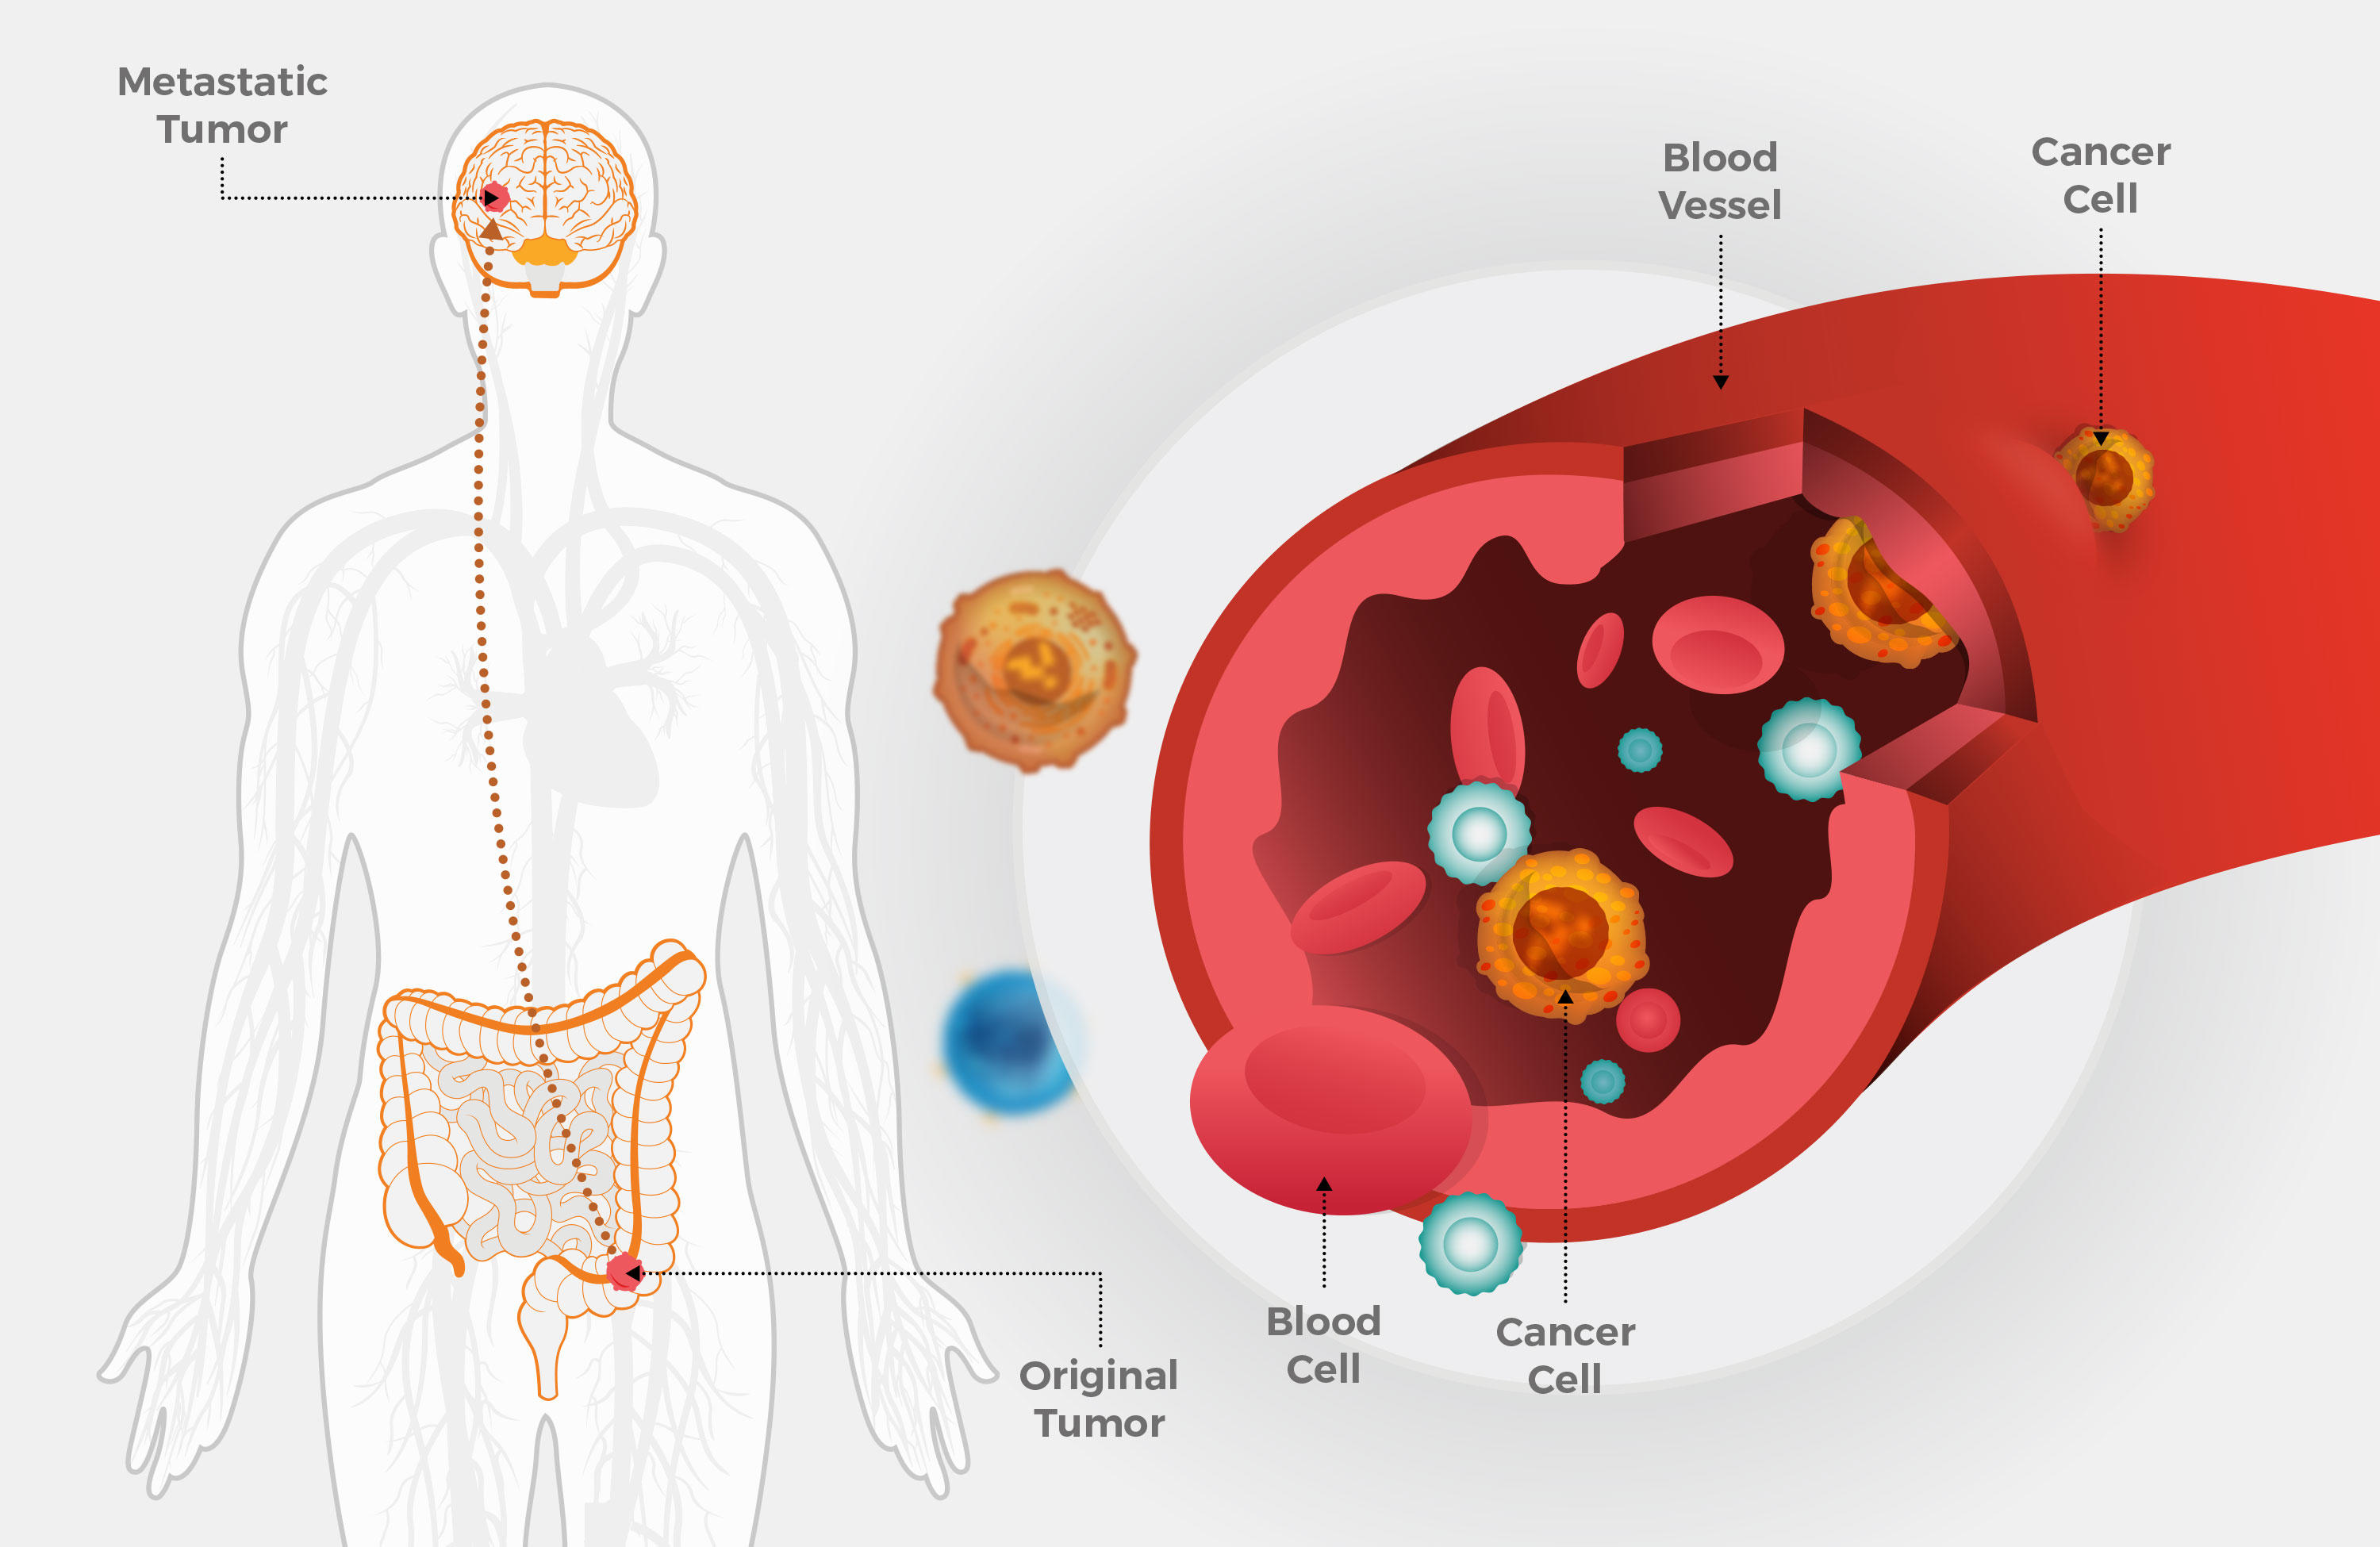 metastatic cancer disease meaning for helminth